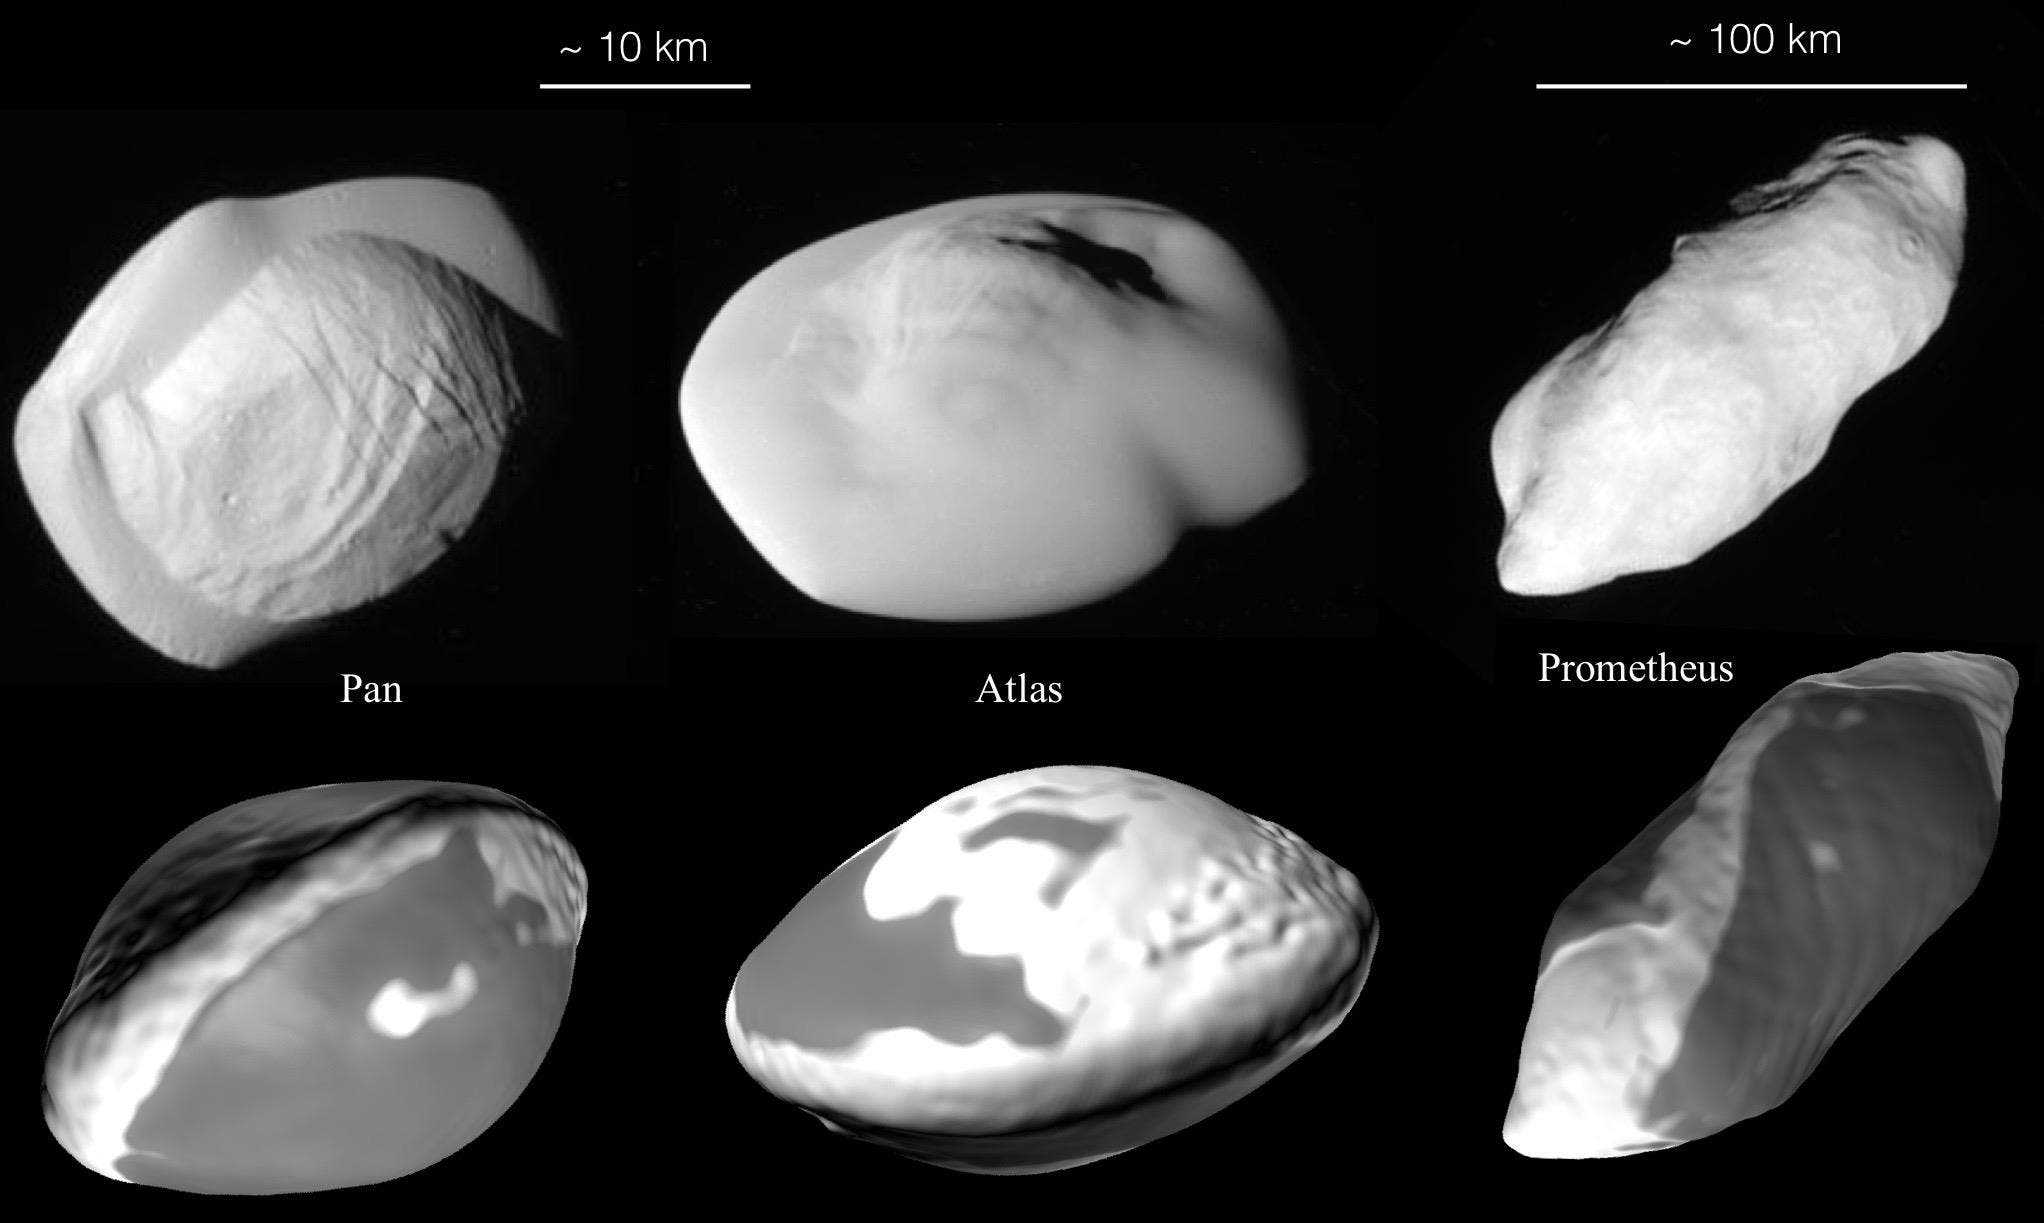 The top row shows 3 small moons of Saturn imaged by the Cassini spacecraft. Shown at the bottom are computer model outcomes. The simulations not only reproduce the shapes, but may also explain why the ridges on Pan and Atlas look different from the rest of their bodies: they are made of smoother material that was squeezed out during the merging process. Image credits: NASA/JPL-Caltech/Space Science Institute/University of Bern.